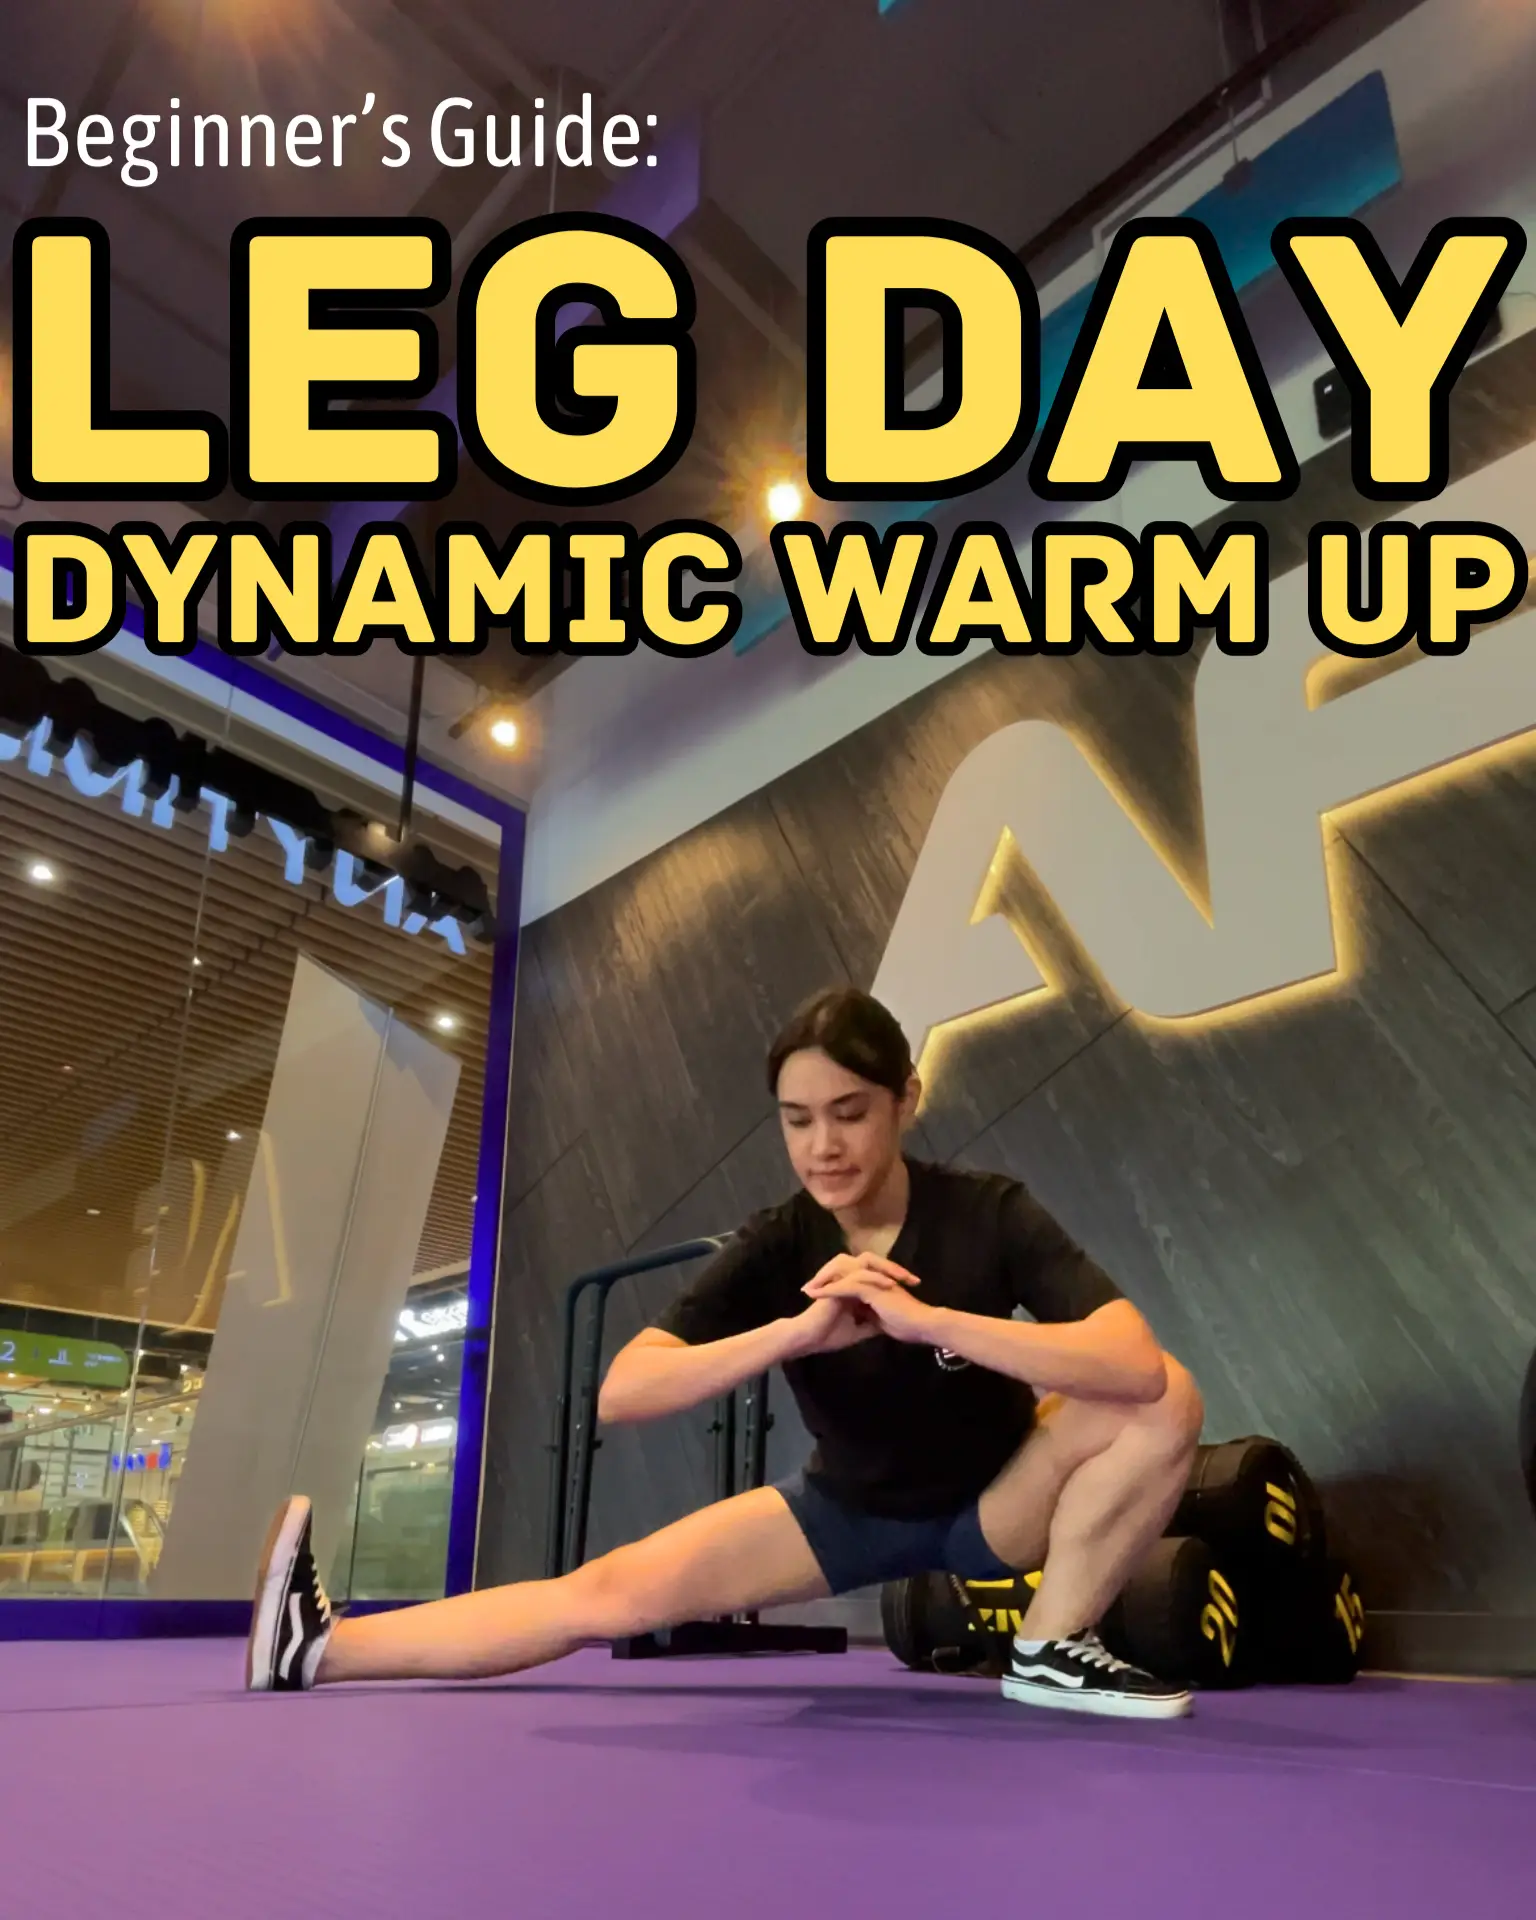 LEG DAY WARM UP ROUTINE (dynamic stretching, hip openers, & glute